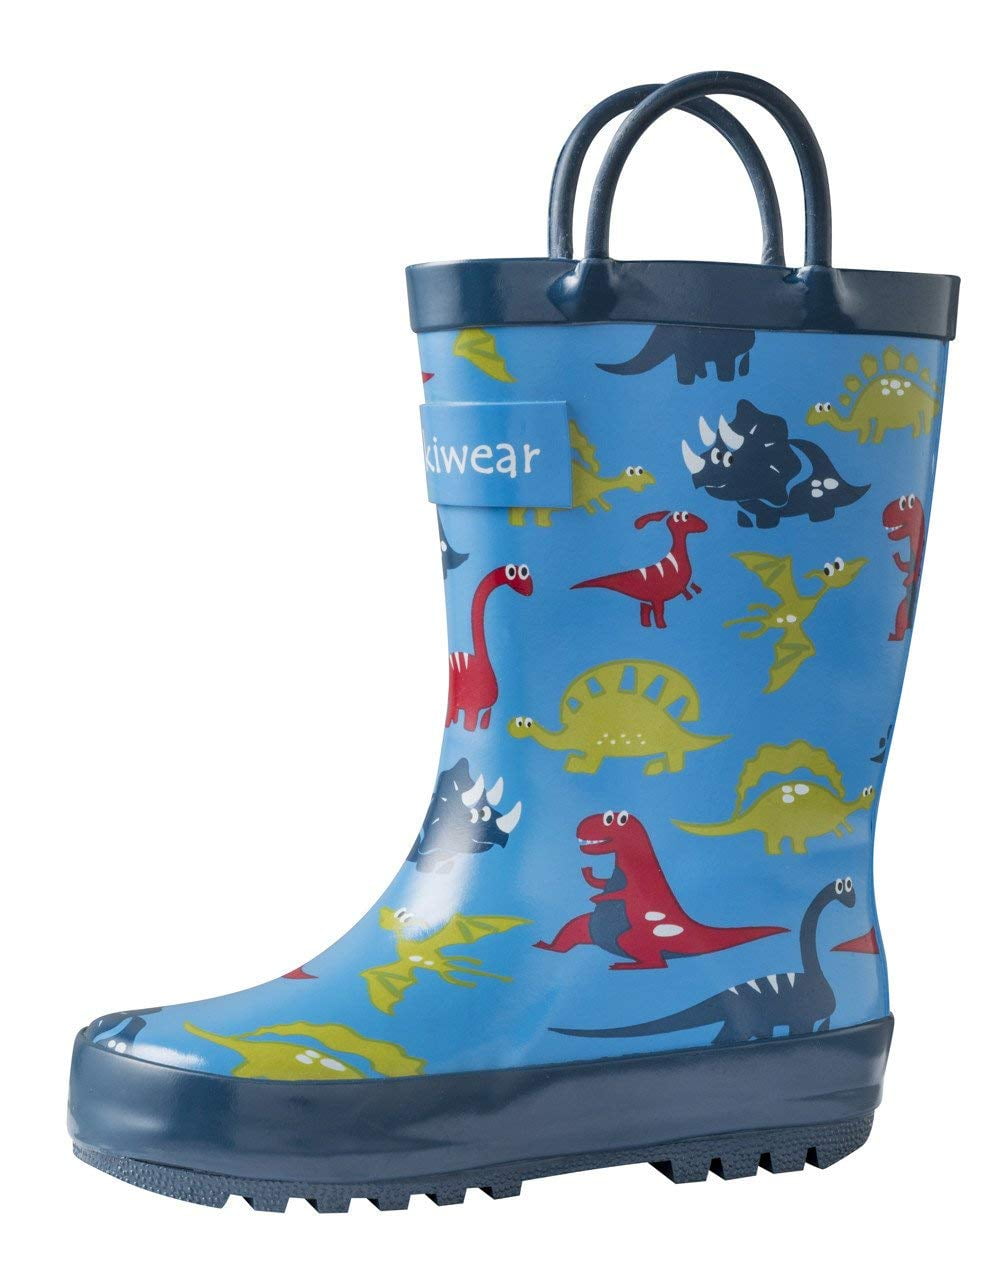 Blue Dino 7T US Toddler OAKI Kids Rubber Rain Boots with Easy-On Handles